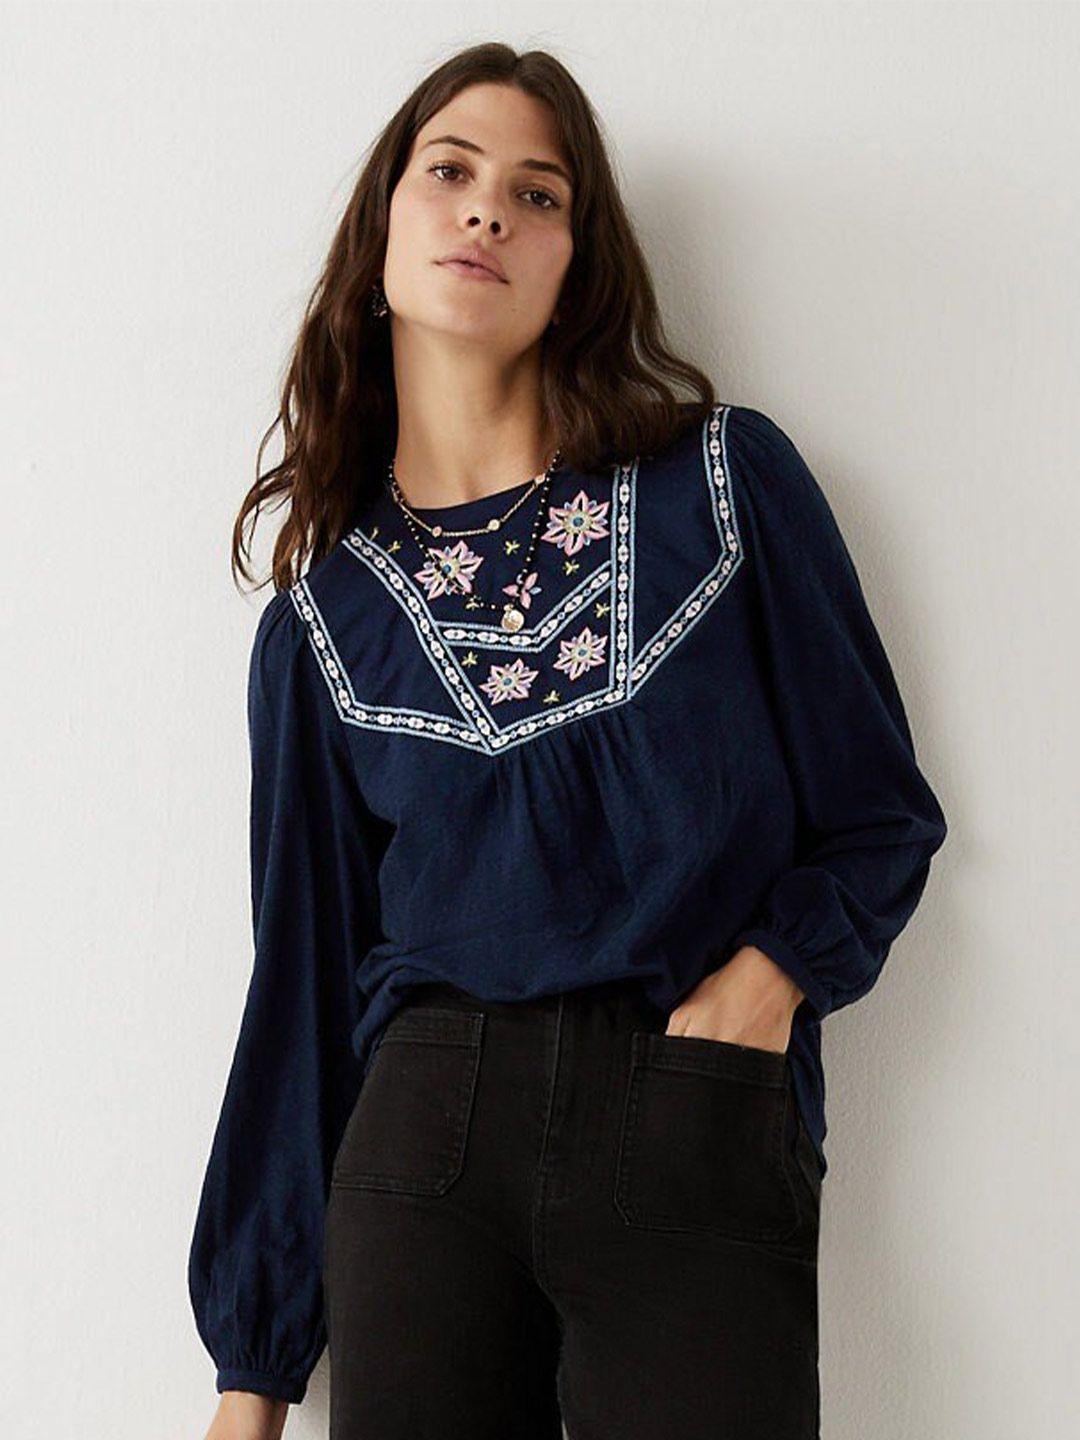 marks & spencer women navy blue floral embroidered pure cotton top